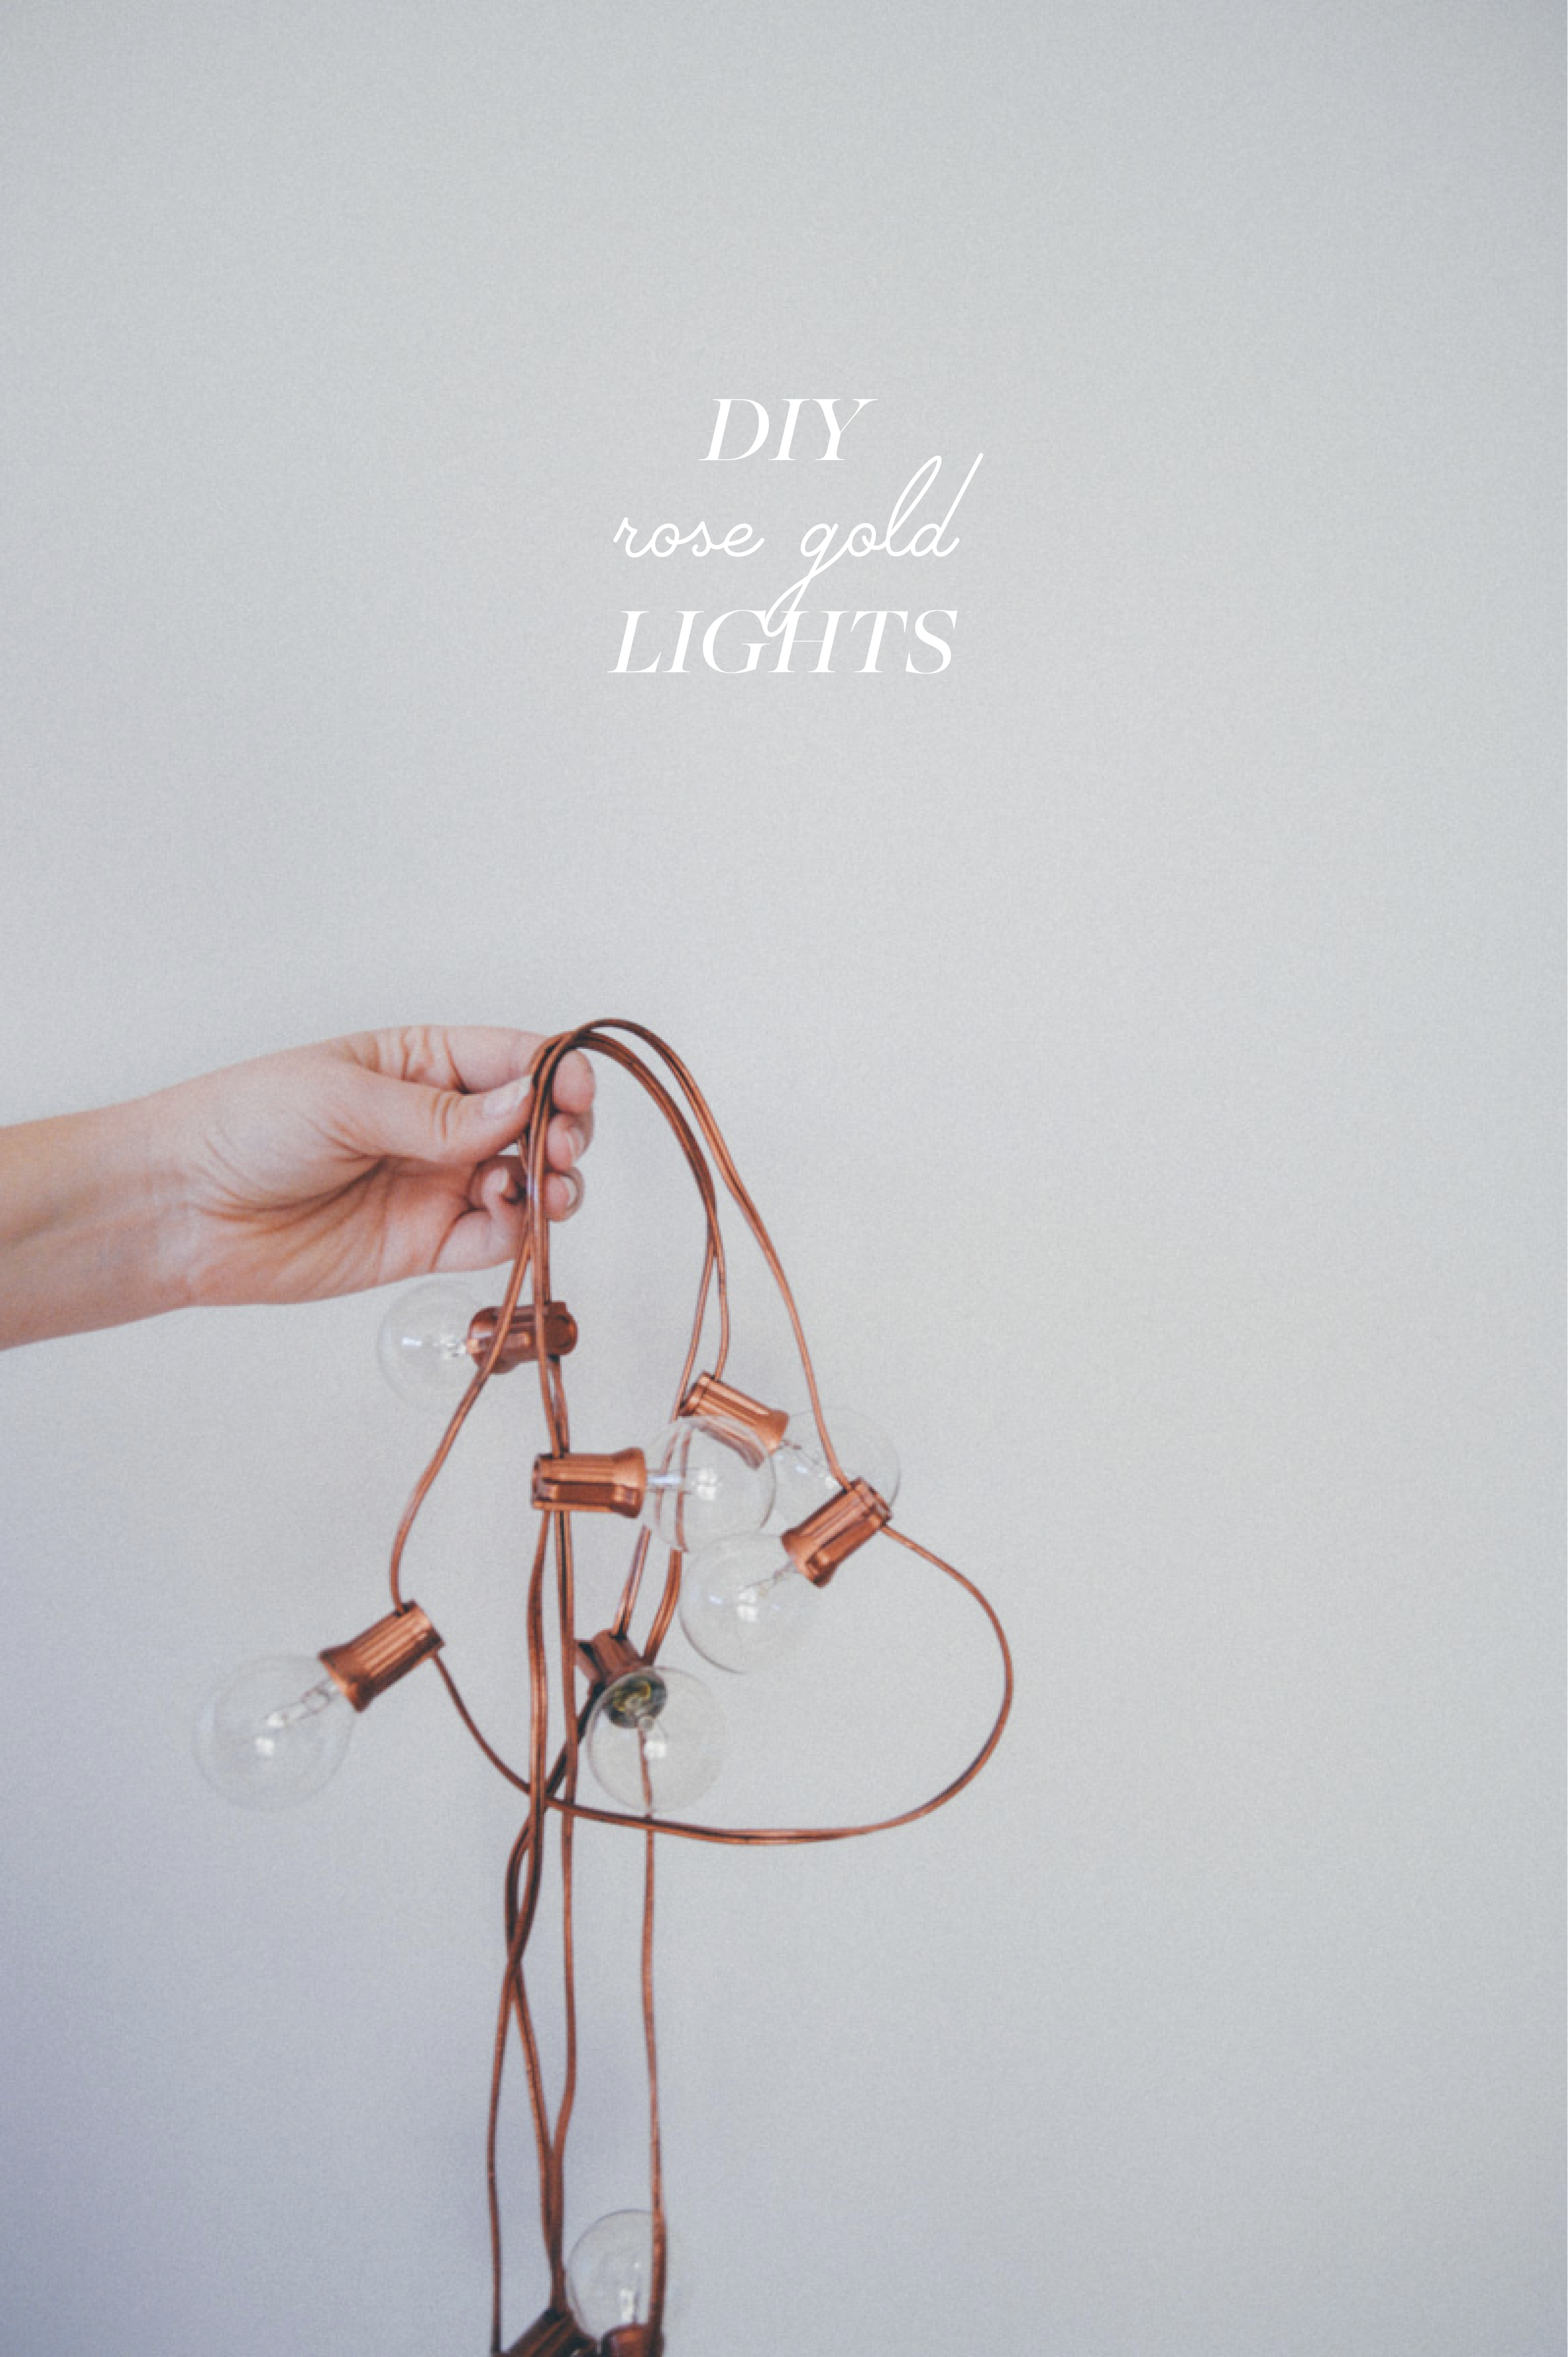 DIY your very own rose gold holiday lights // by gabriella - @gabivalladares